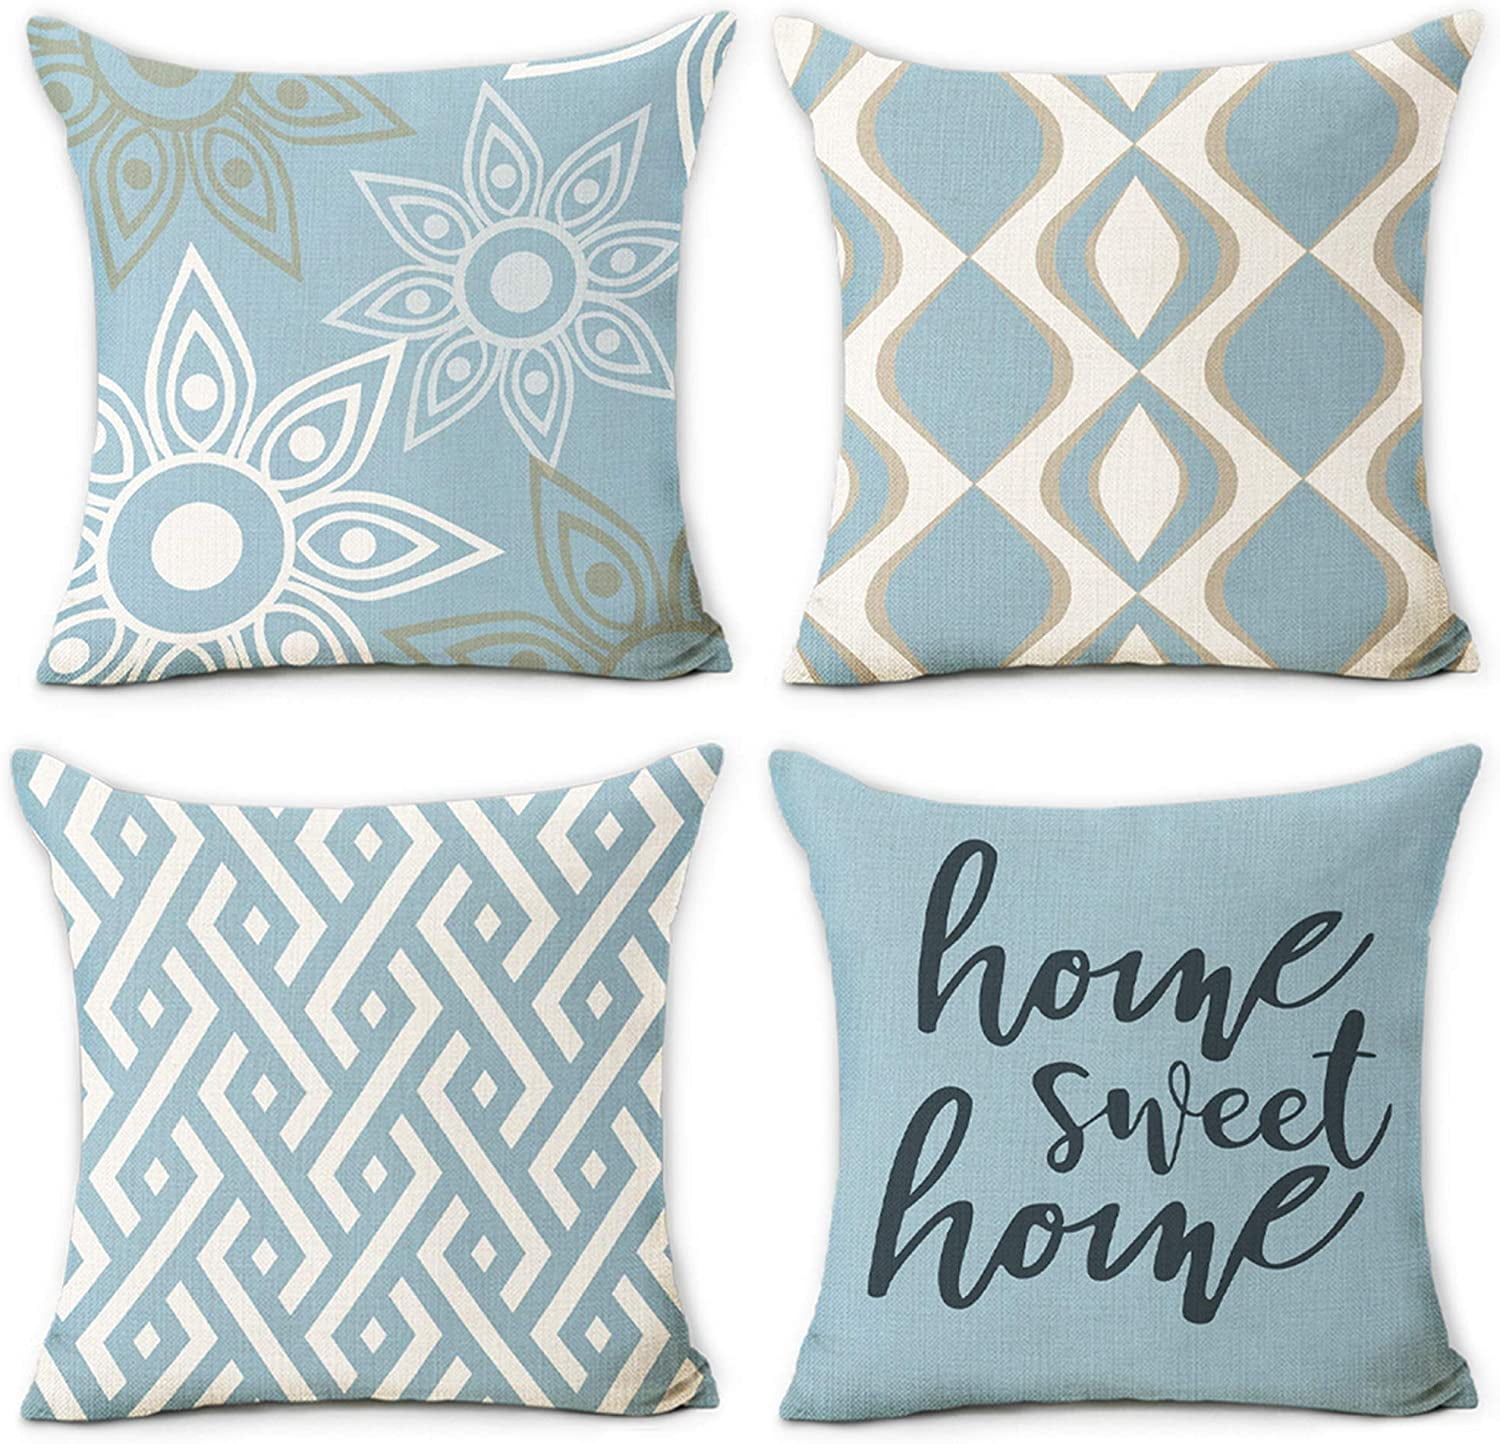 Ethnic pillow cover Waterproof case Home gifts patterned pillow blue pillow throw pillow Home decor Digital Print Cushion Cover